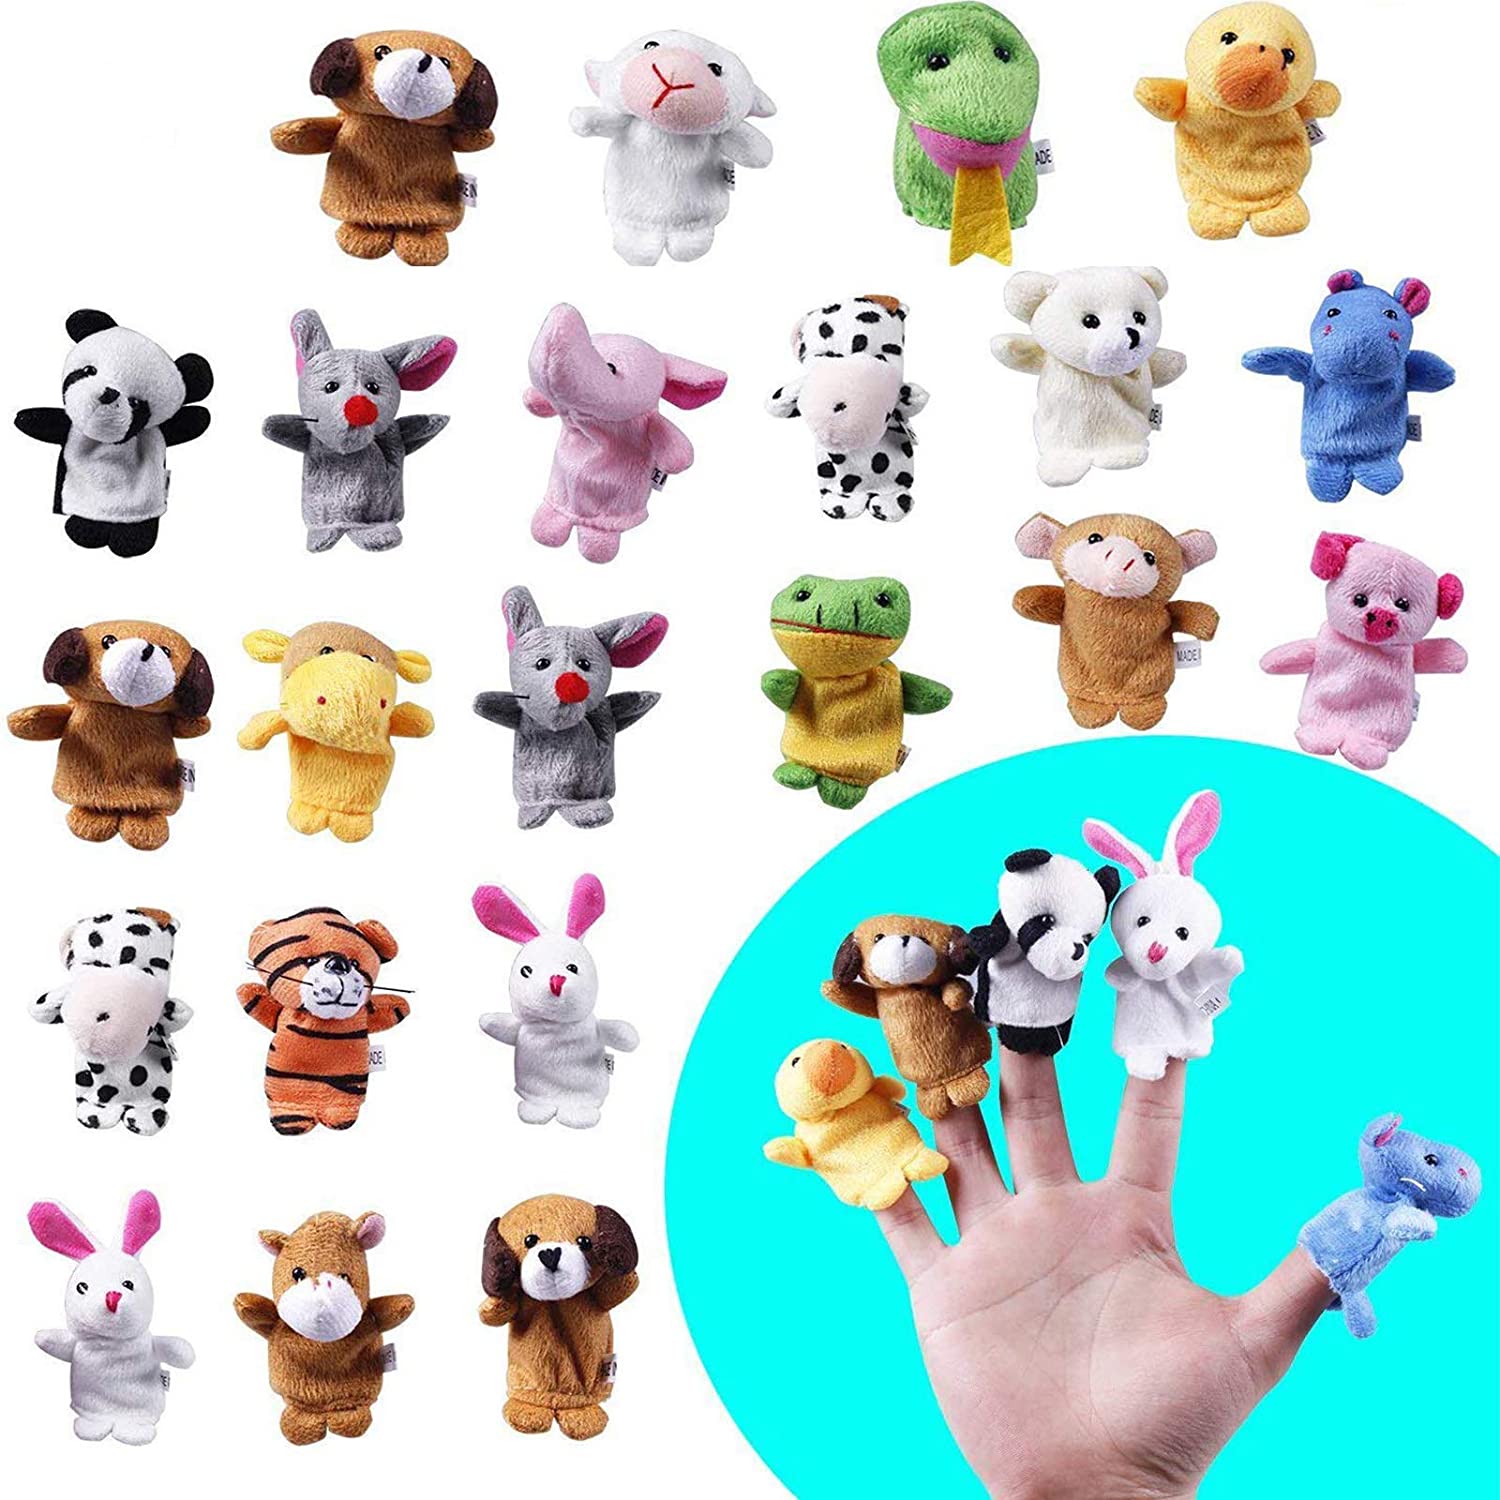 Set of 10 pieces Hand Finger Puppets Cartoon Plush Animal Educational Toys 